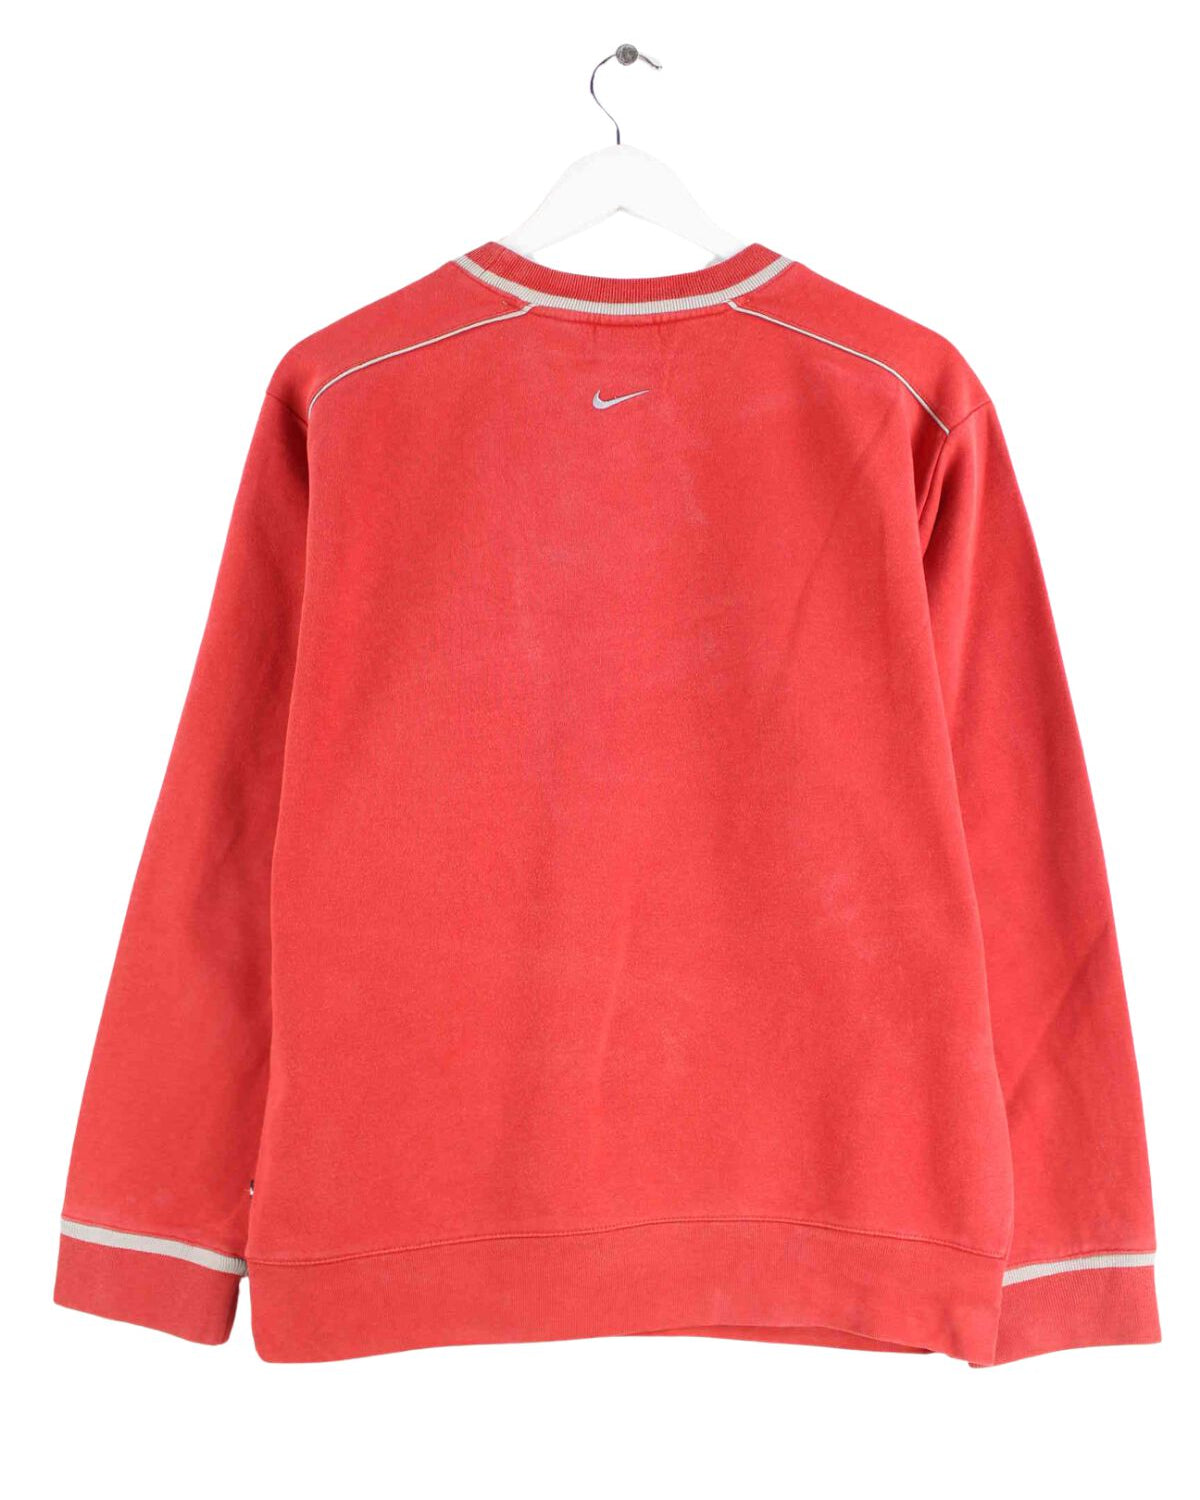 Nike y2k Athle71c Print Sweater Rot L (back image)